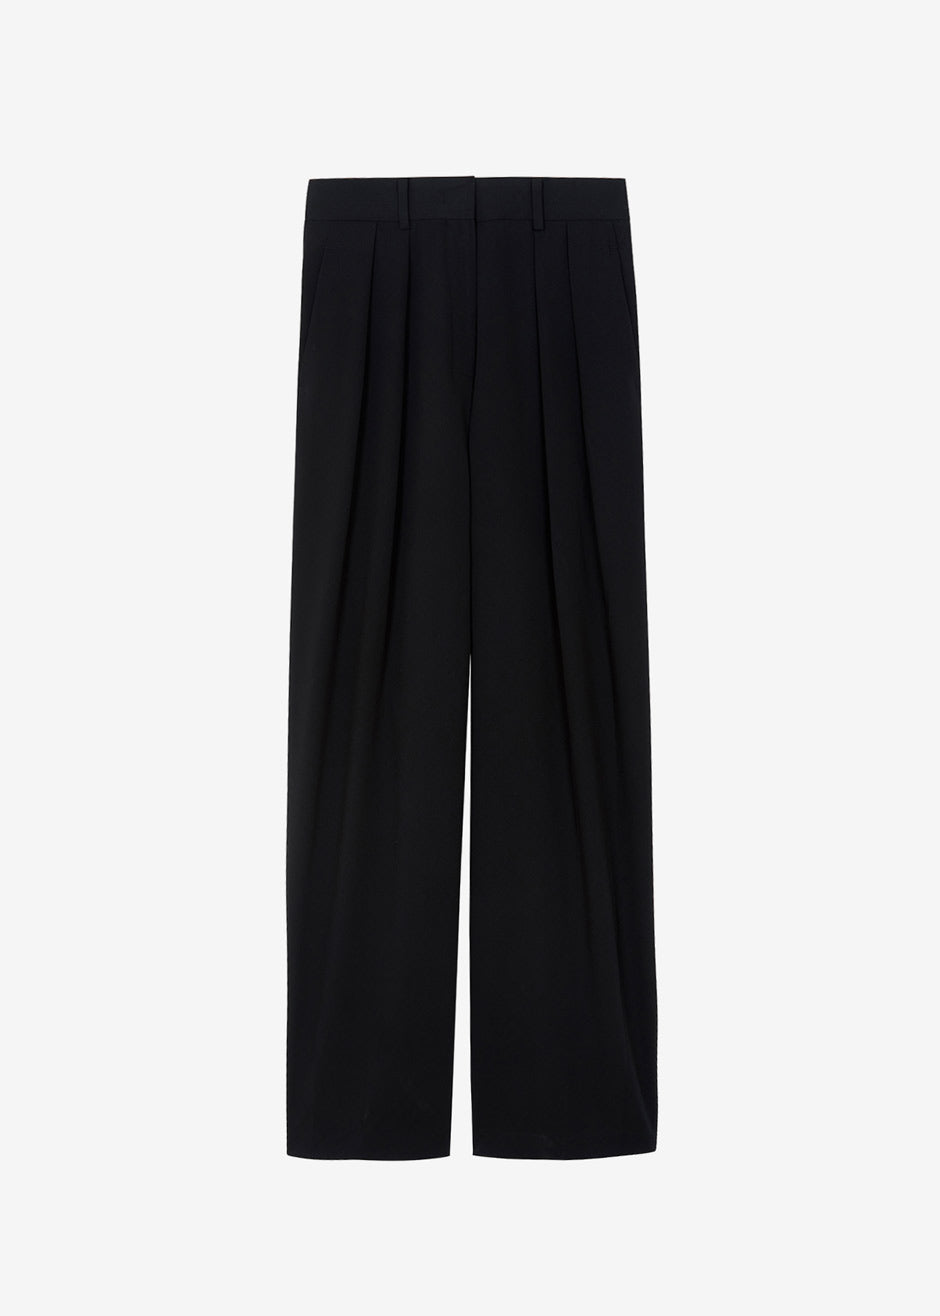 Tansy Pleated Trousers - Black - 13